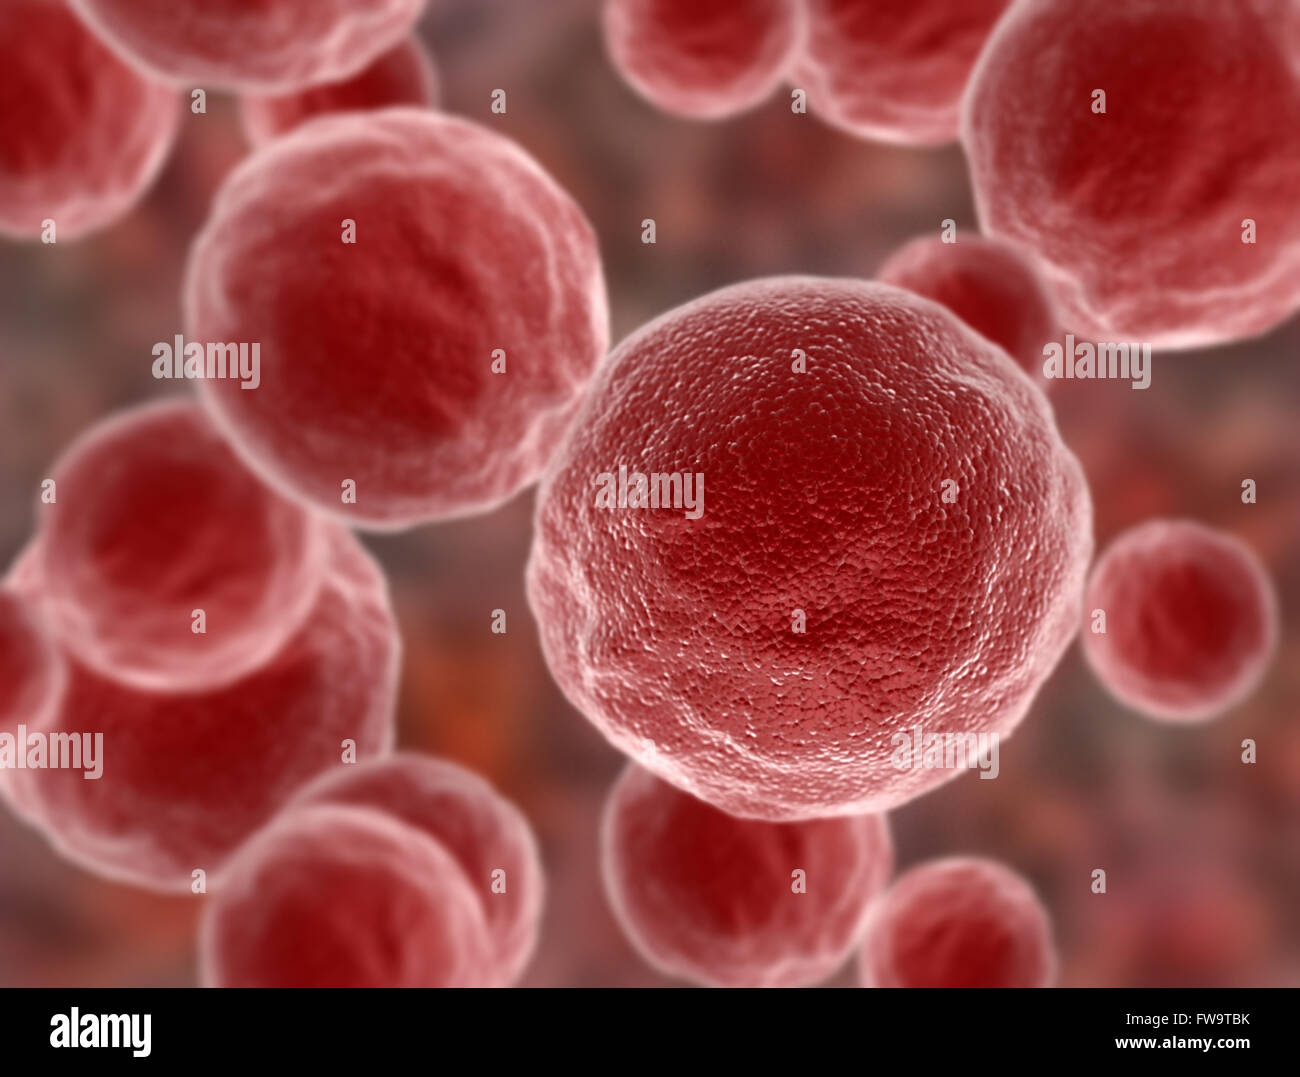 Cancer cells Stock Photo